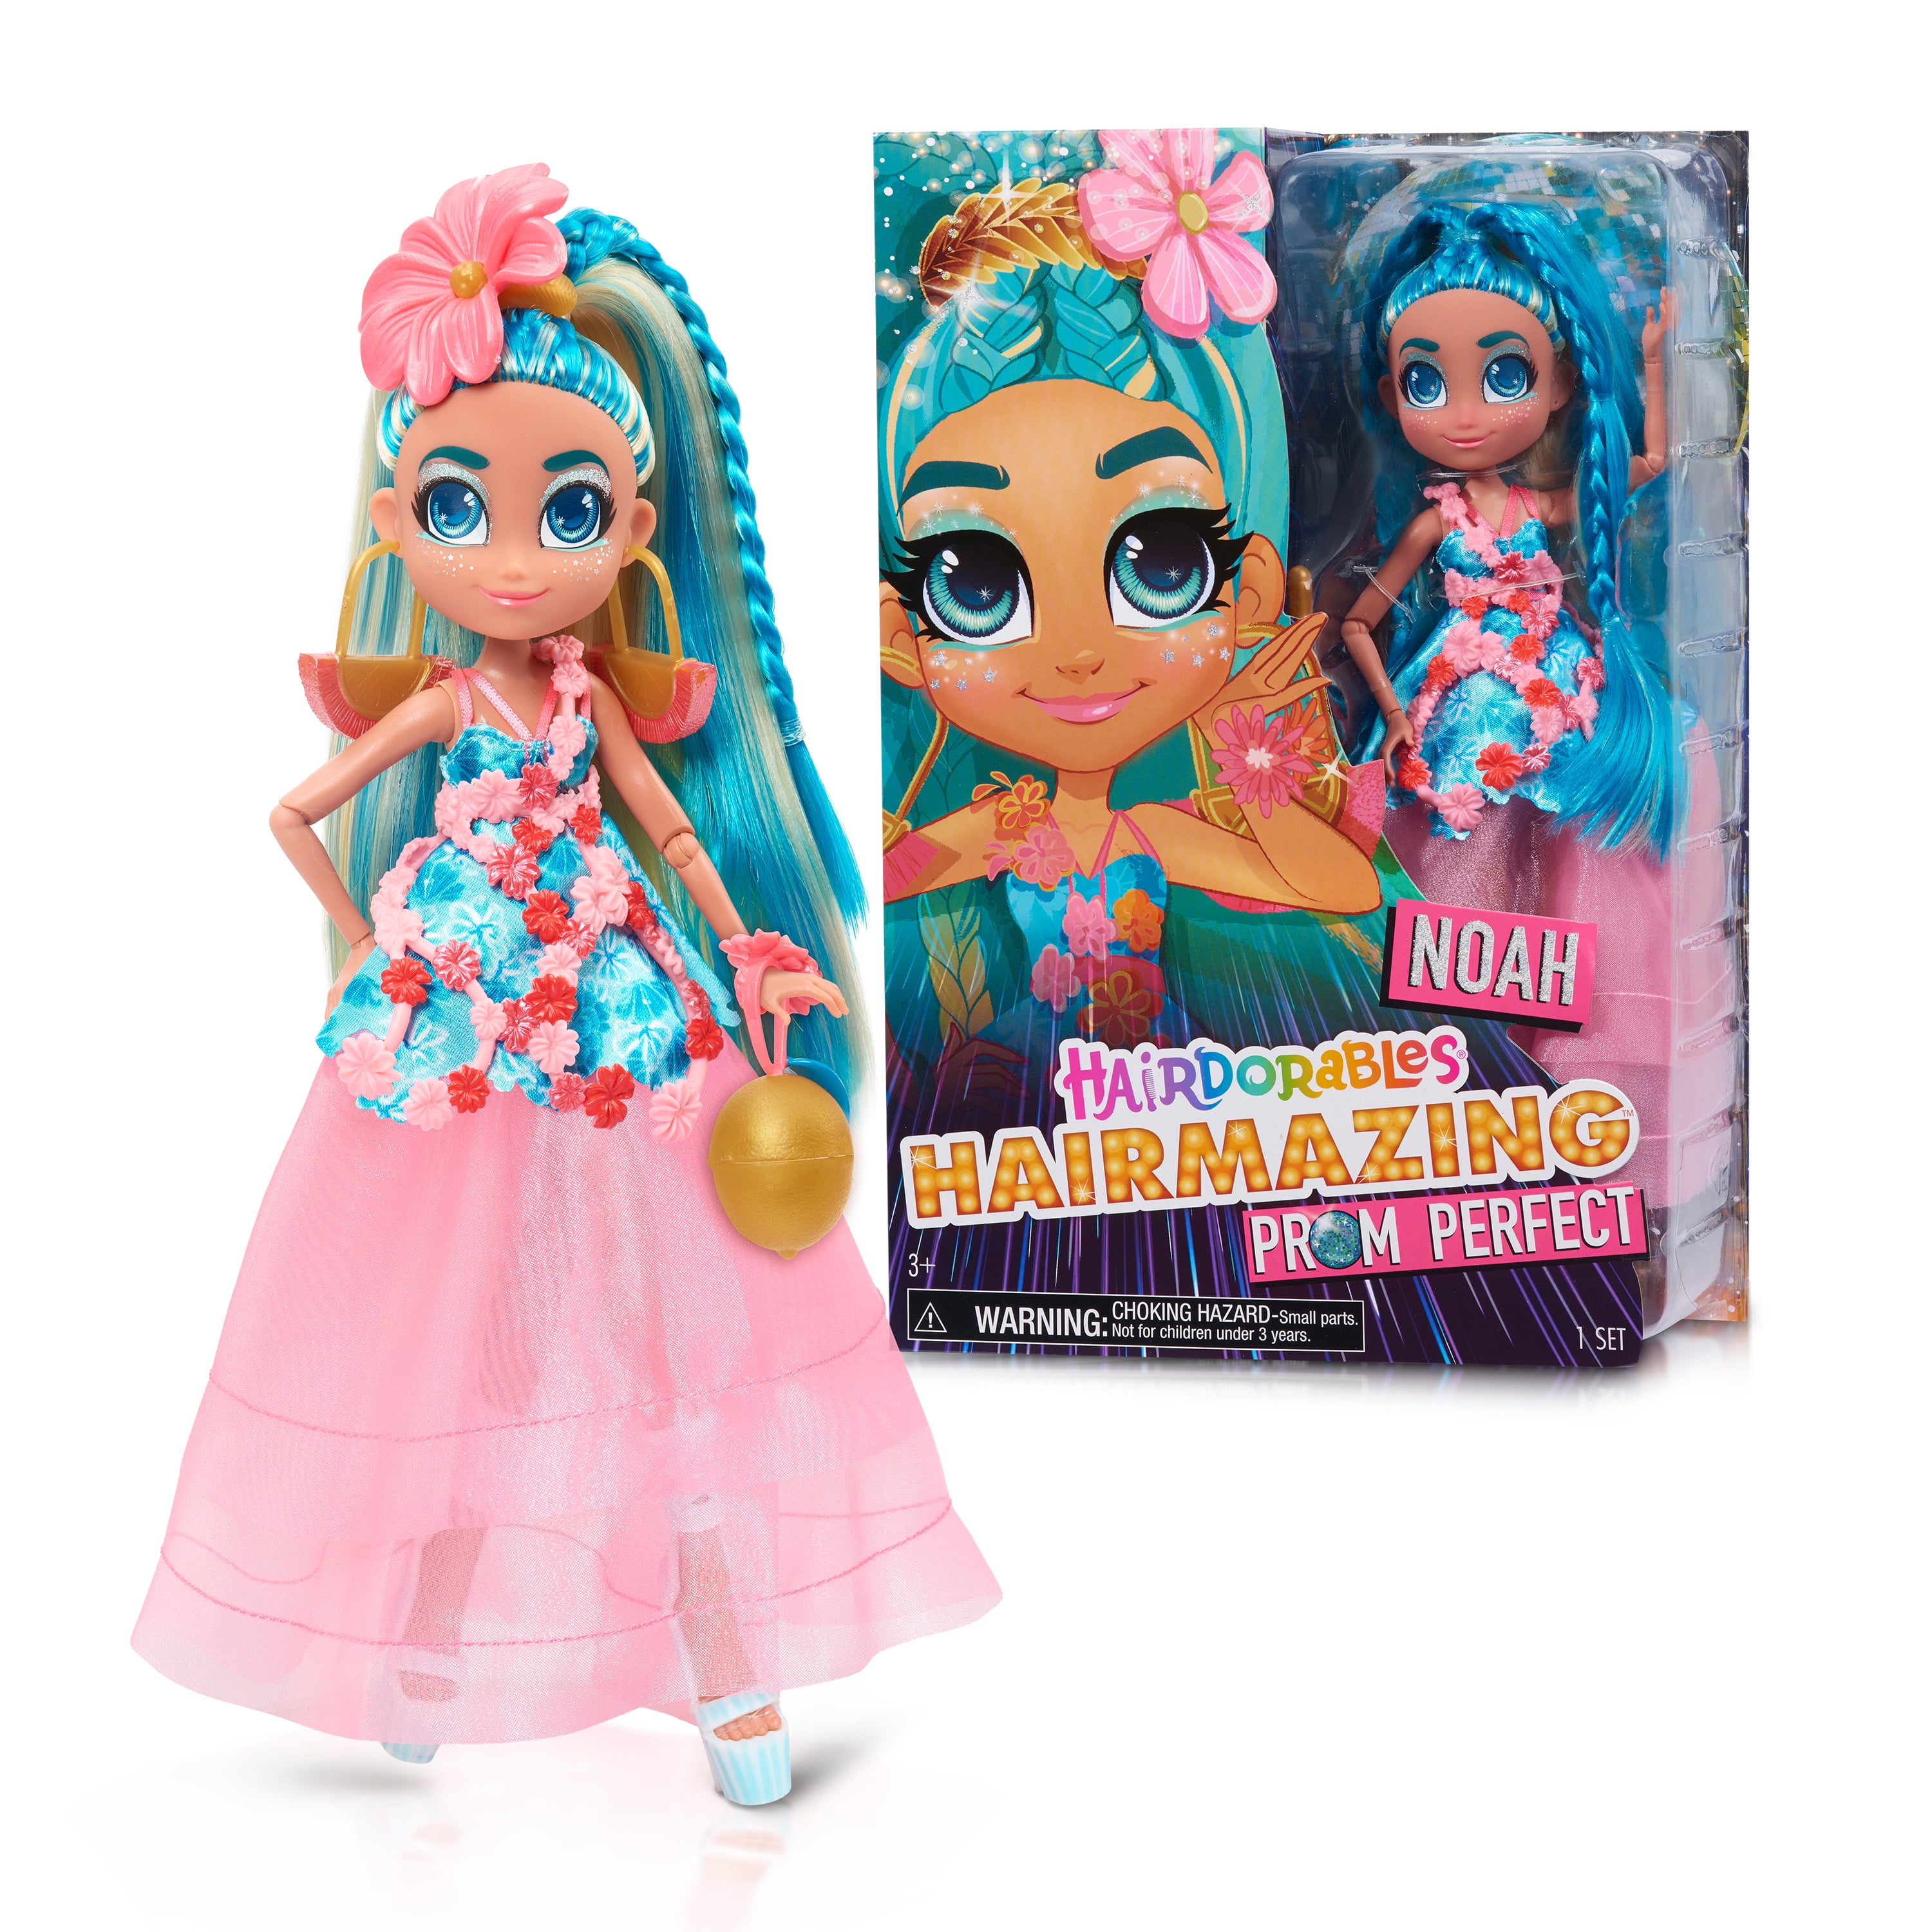 NEW hairdorables hairmazing grazing Noah Dee Dee Doll hairdudeables Boxed 